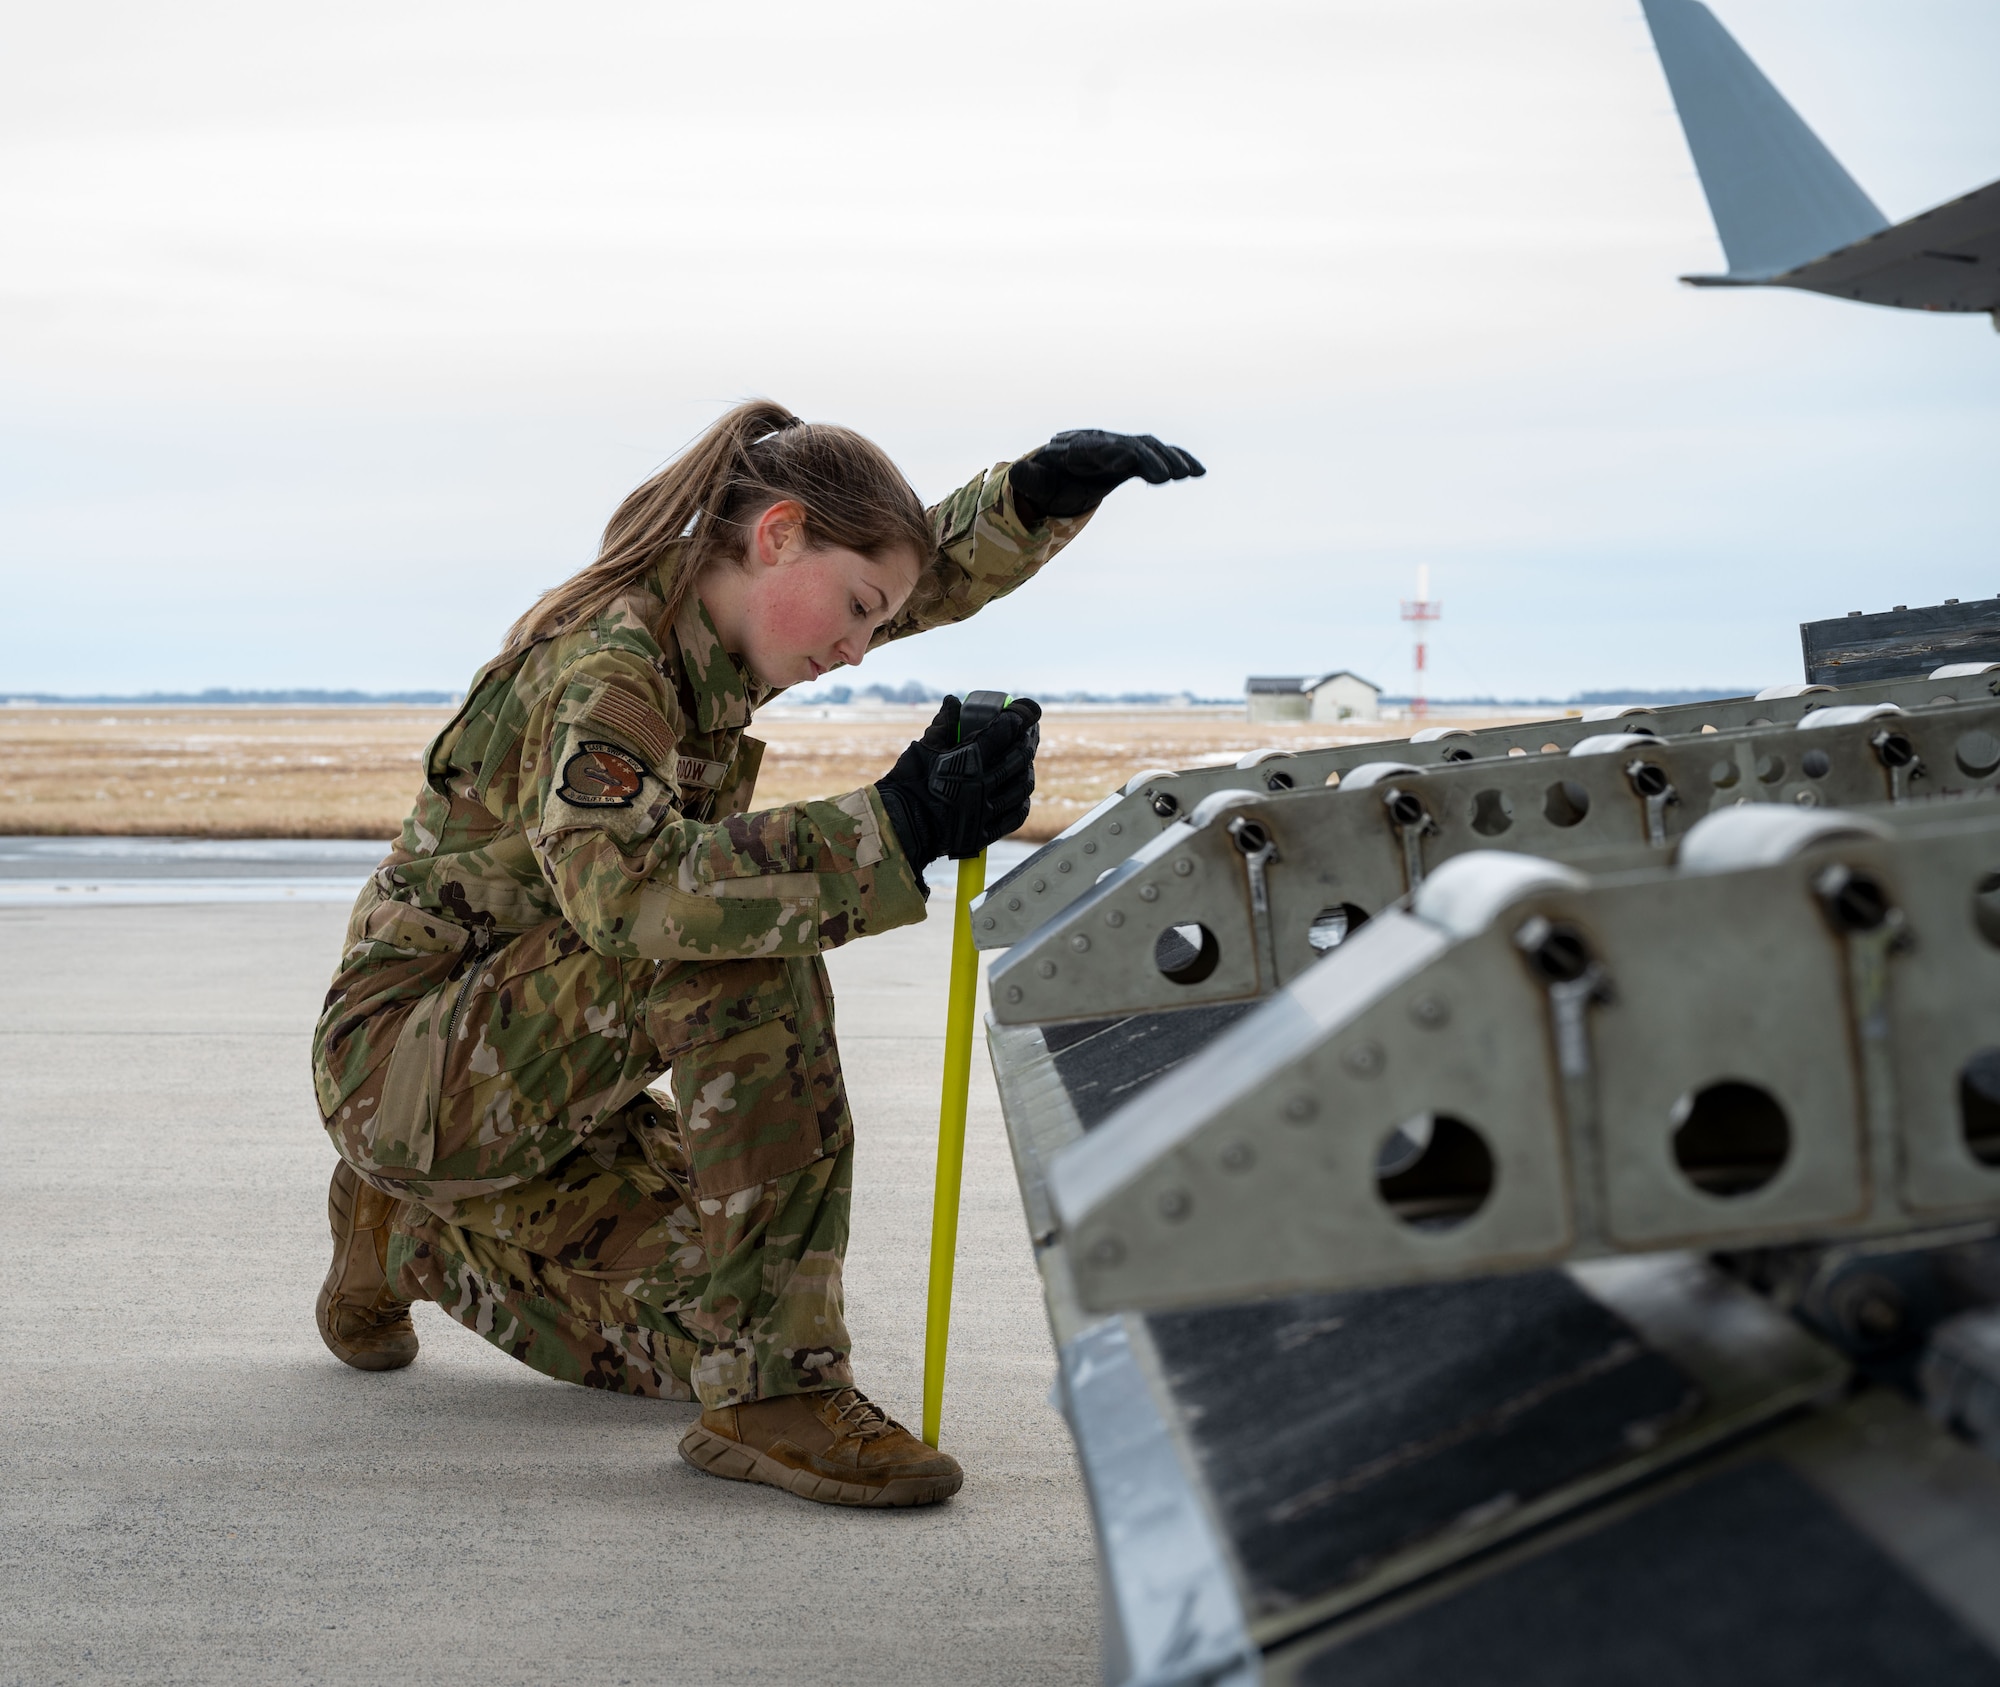 U.S. Air Force Airman 1st Class Alexandra Shaddow, 3rd Airlift Squadron loadmaster, motions to lower the ramp of a C-17 Globemaster III during combat offload Method C testing at Dover Air Force Base, Delaware, Jan. 23, 2024. The new combat offload Method C would allow C-17s to deliver cargo without the assistance of any material handling equipment. (U.S. Air Force photo by Airman 1st Class Amanda Jett)